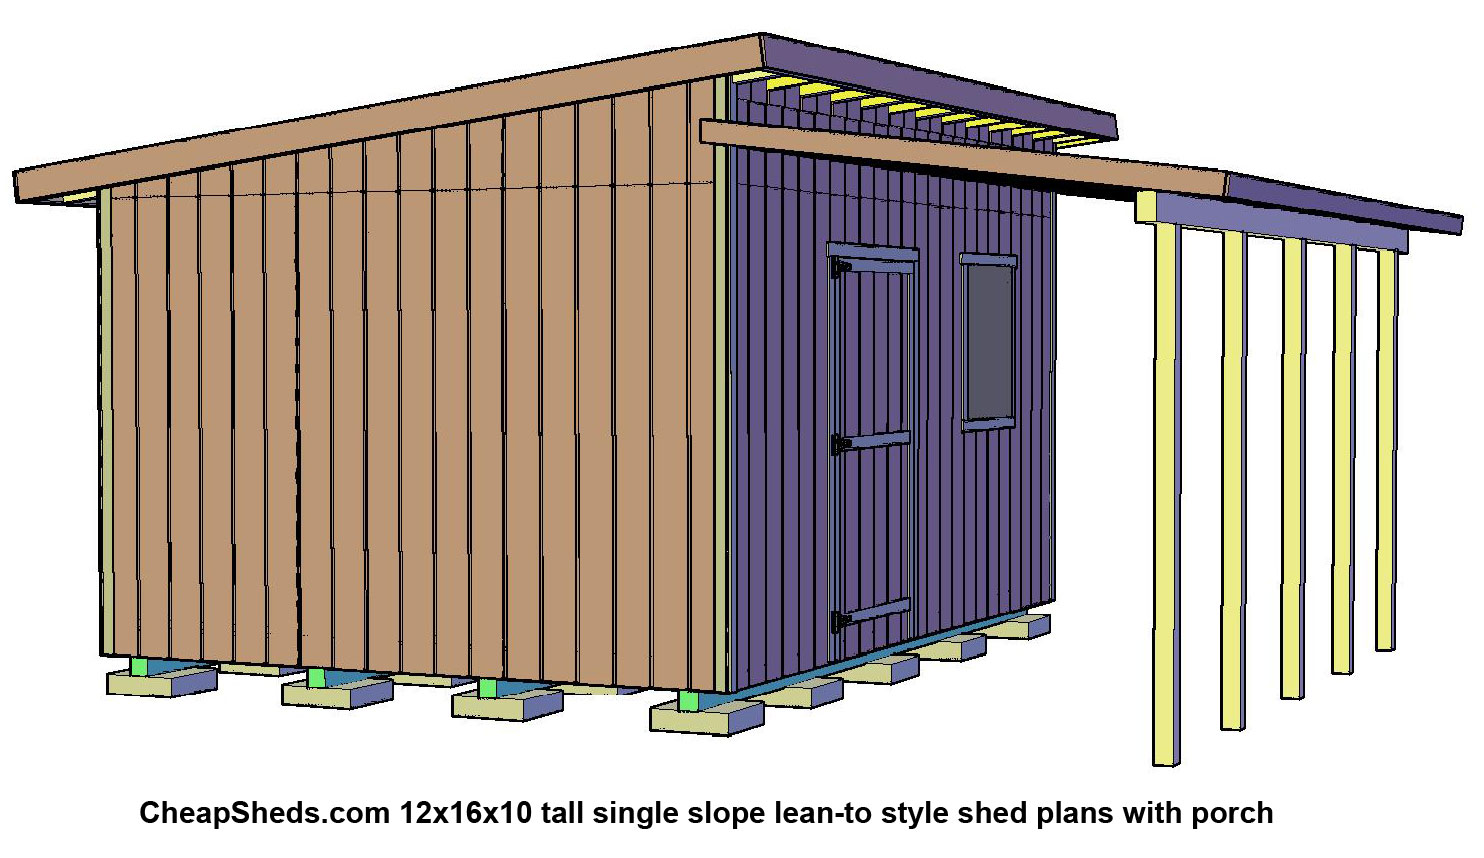 018-12x16x10-tall-lean-to-shed-with-porch